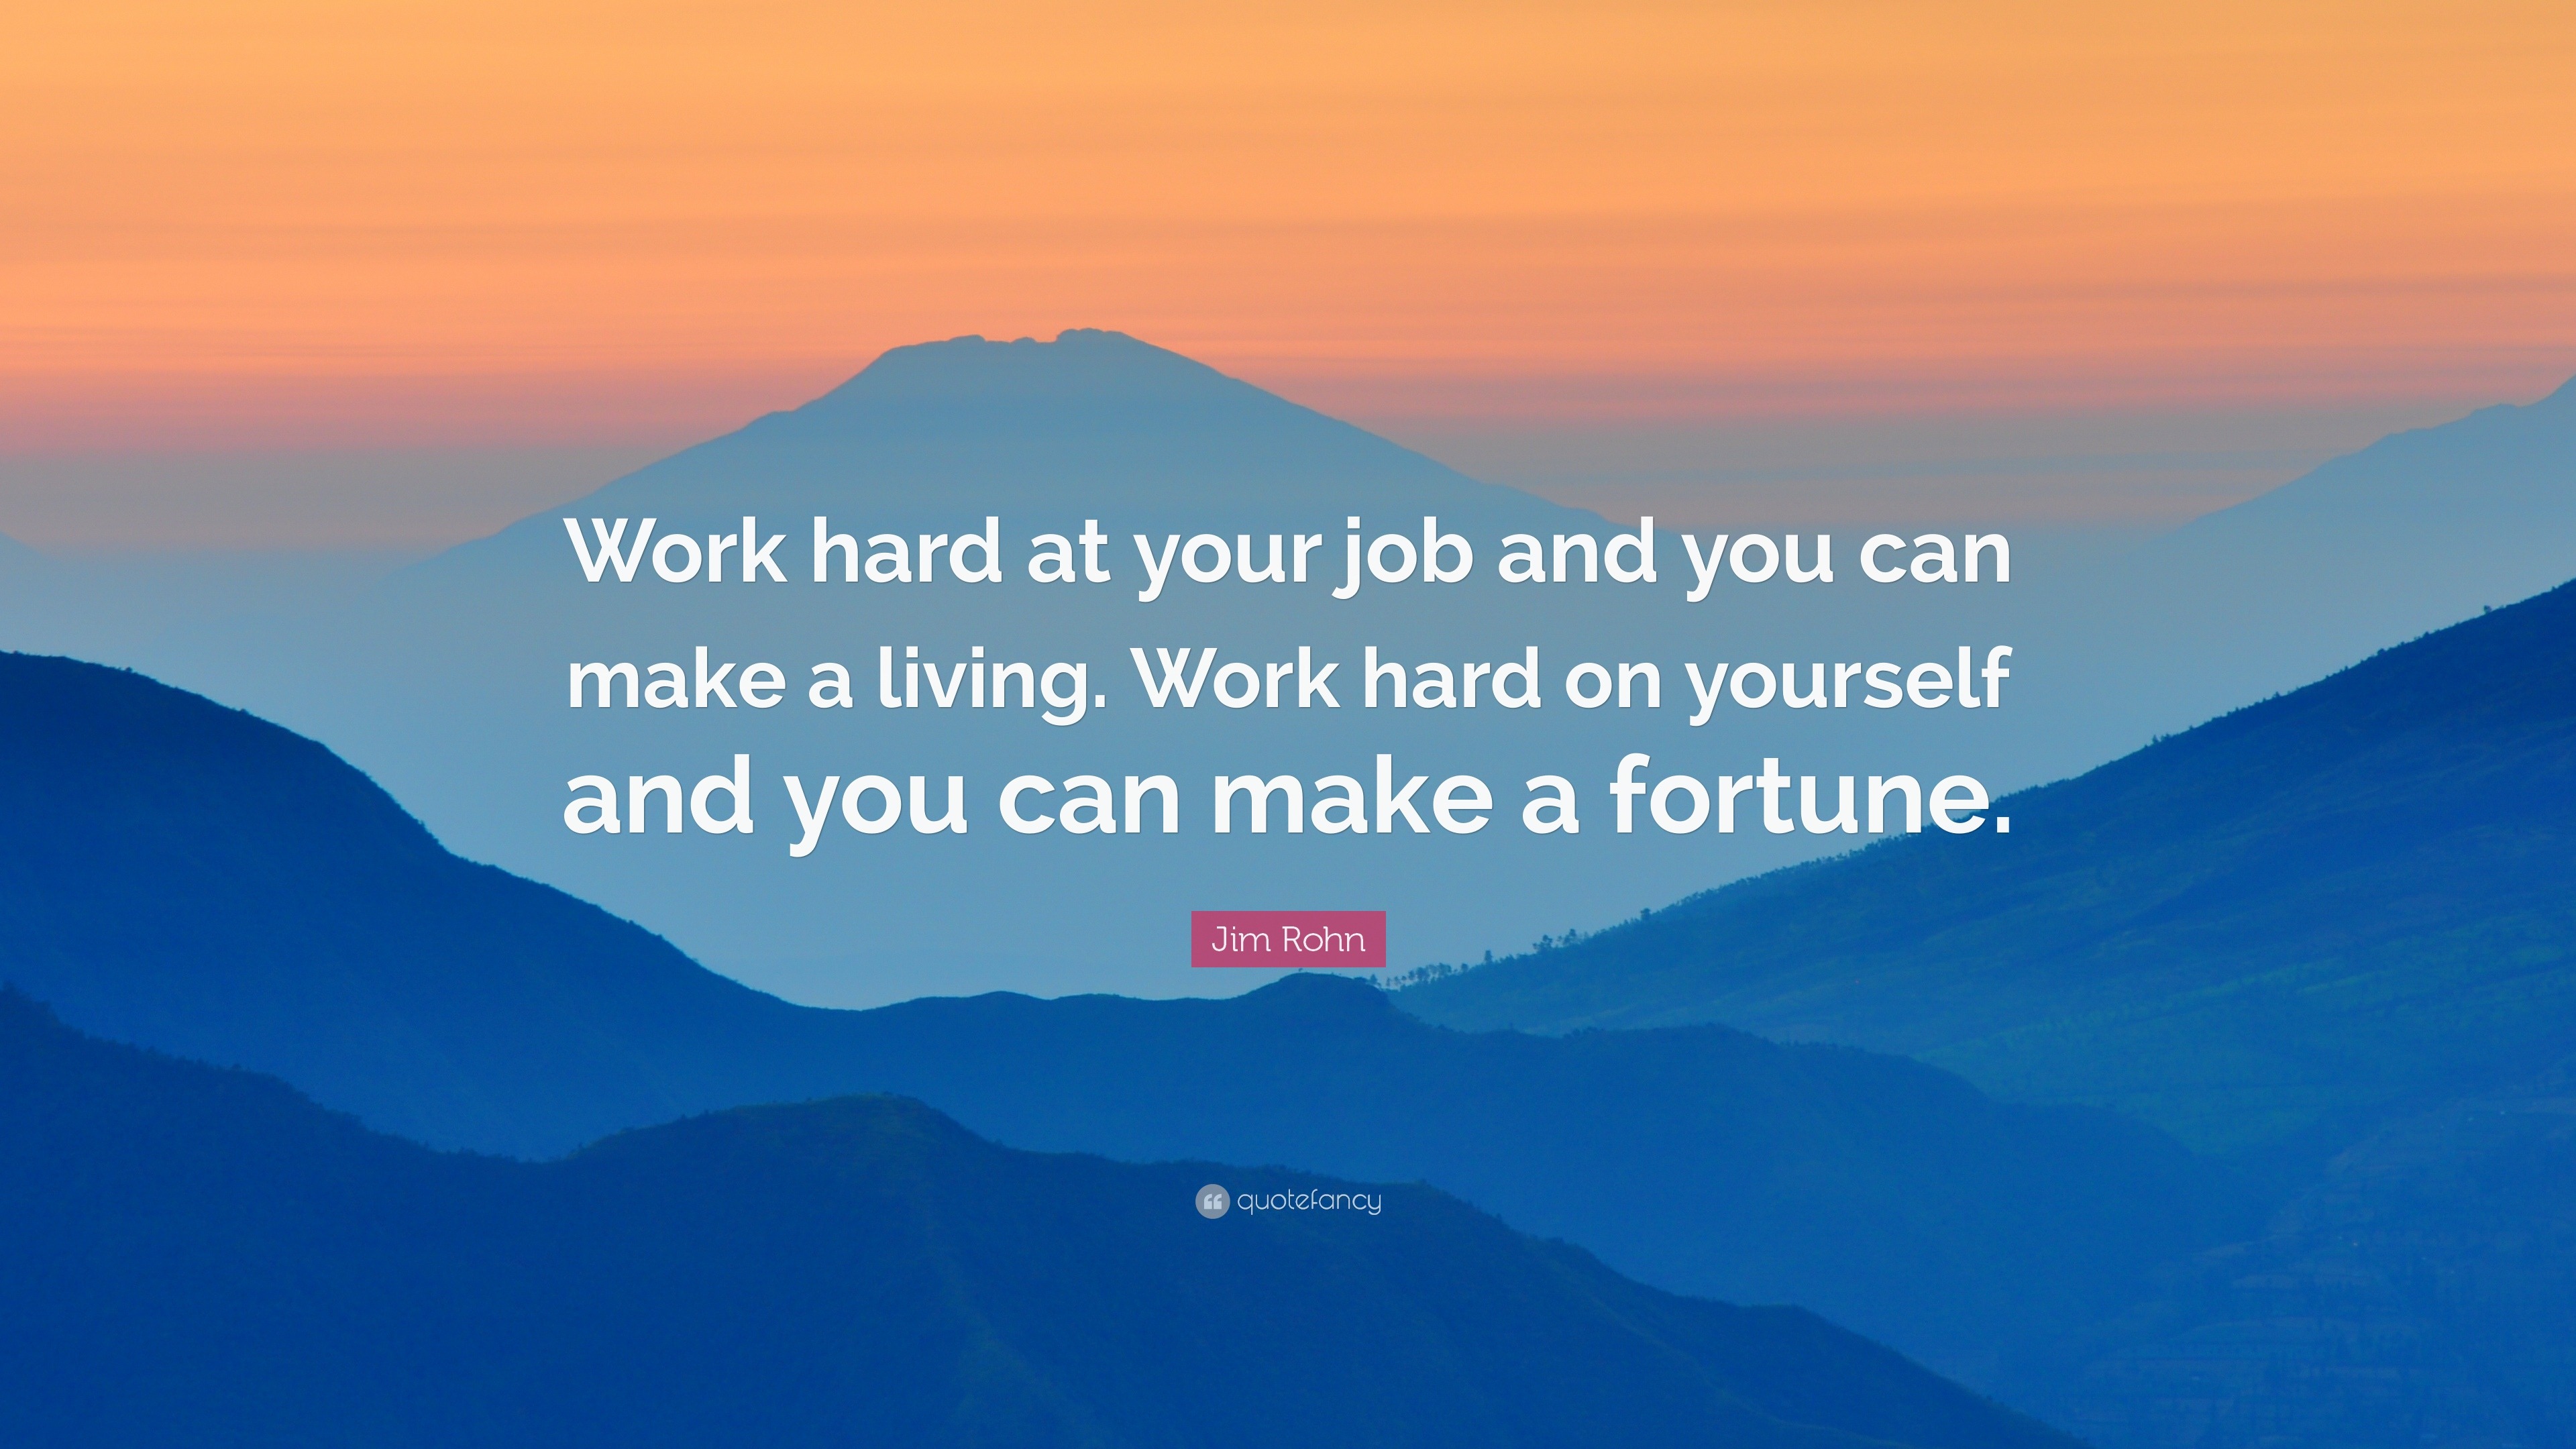 Jim Rohn Quote: “Work hard at your job and you can make a living. Work